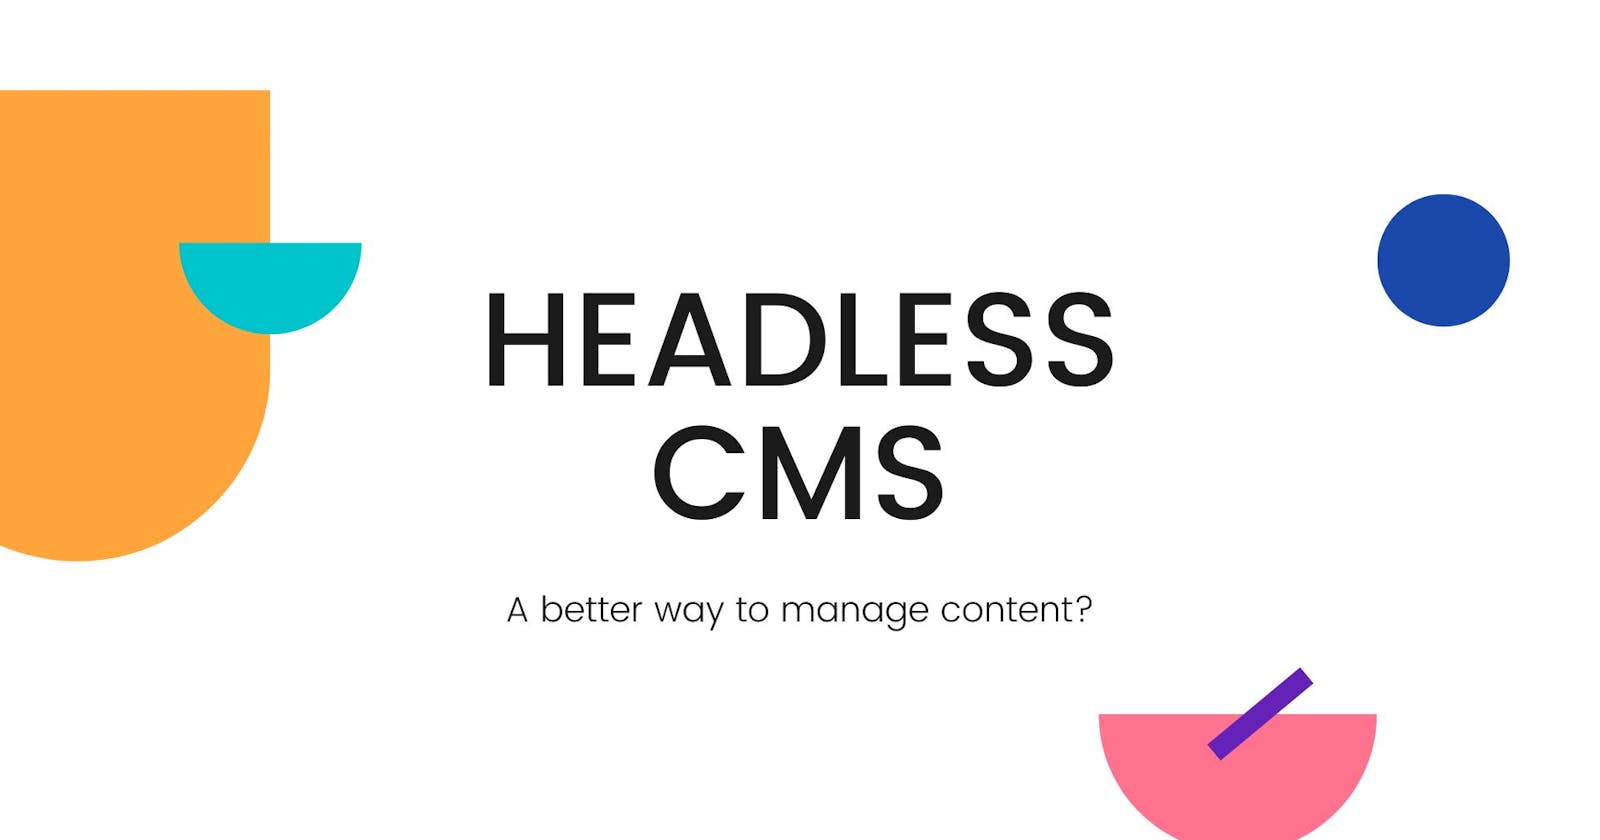 Headless Content Management Systems(CMS): Yay or Nay?